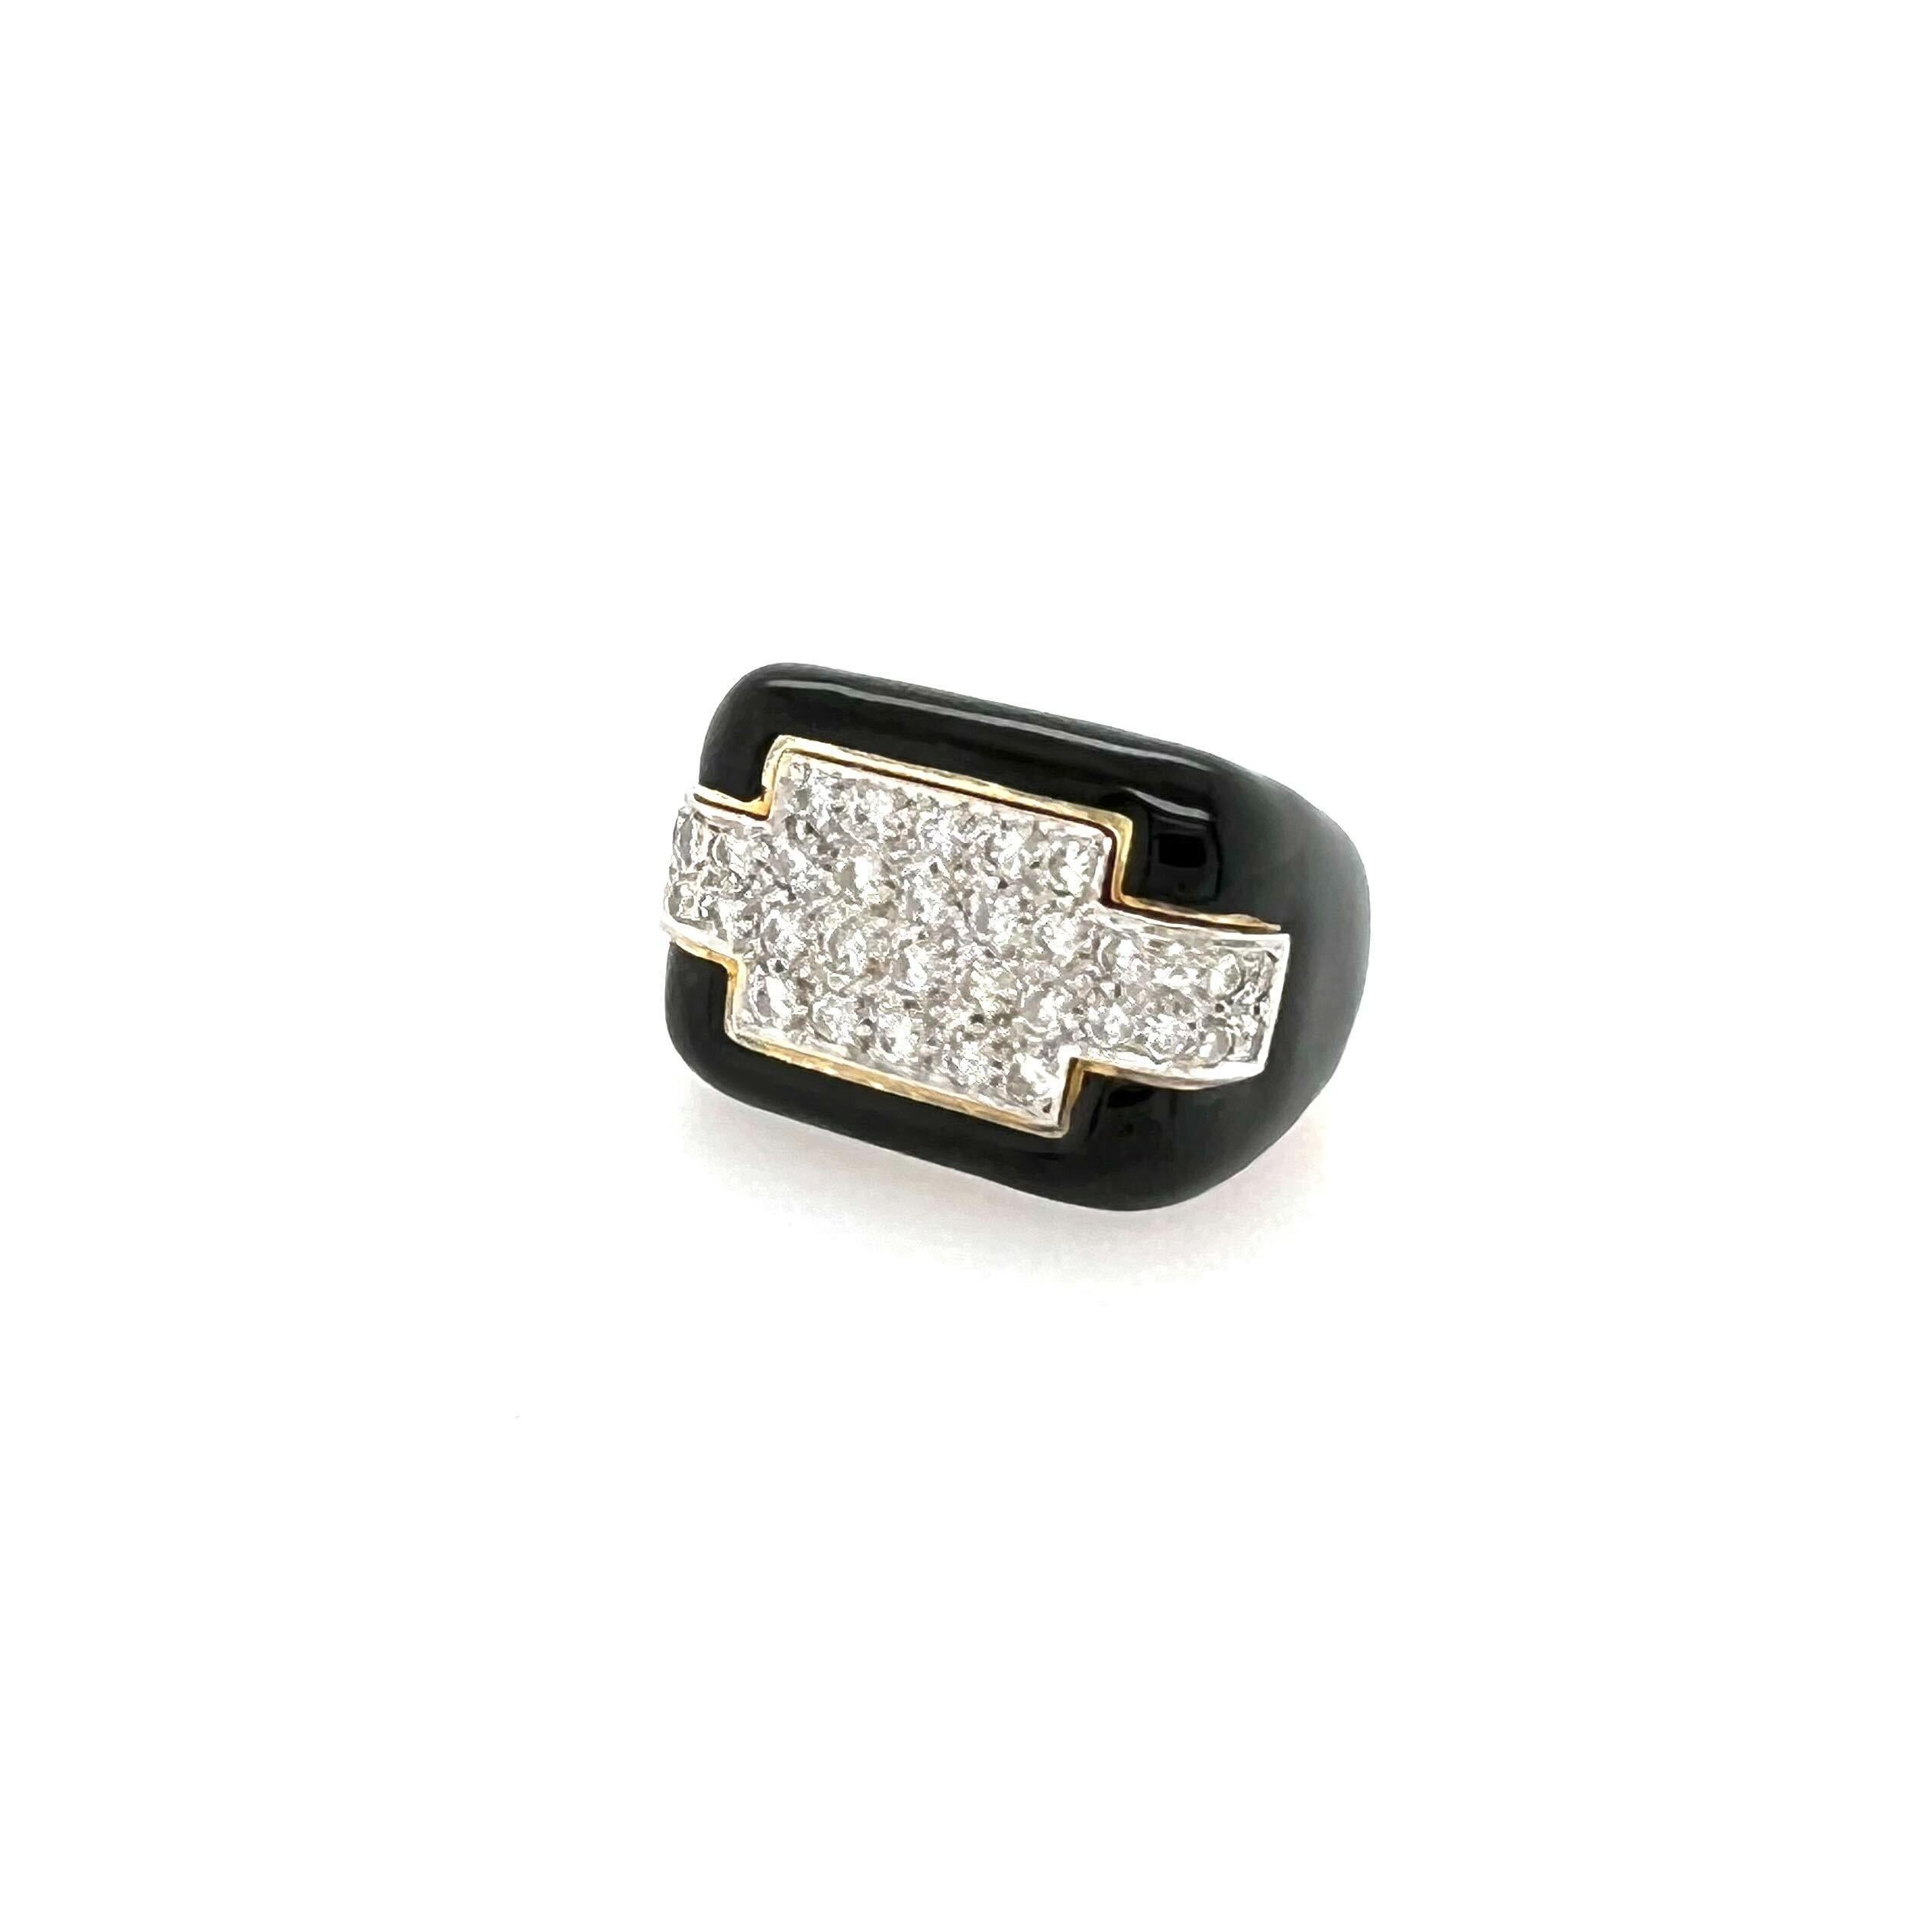 An 18 karat yellow gold, black enamel and diamond ring.  Fashioned with a rectangular top of black enamel set with a plaque of thirty six (36) brilliant cut diamonds.  Total diamond weight approximately 1.08 carats.  Size approximately 7.  Gross